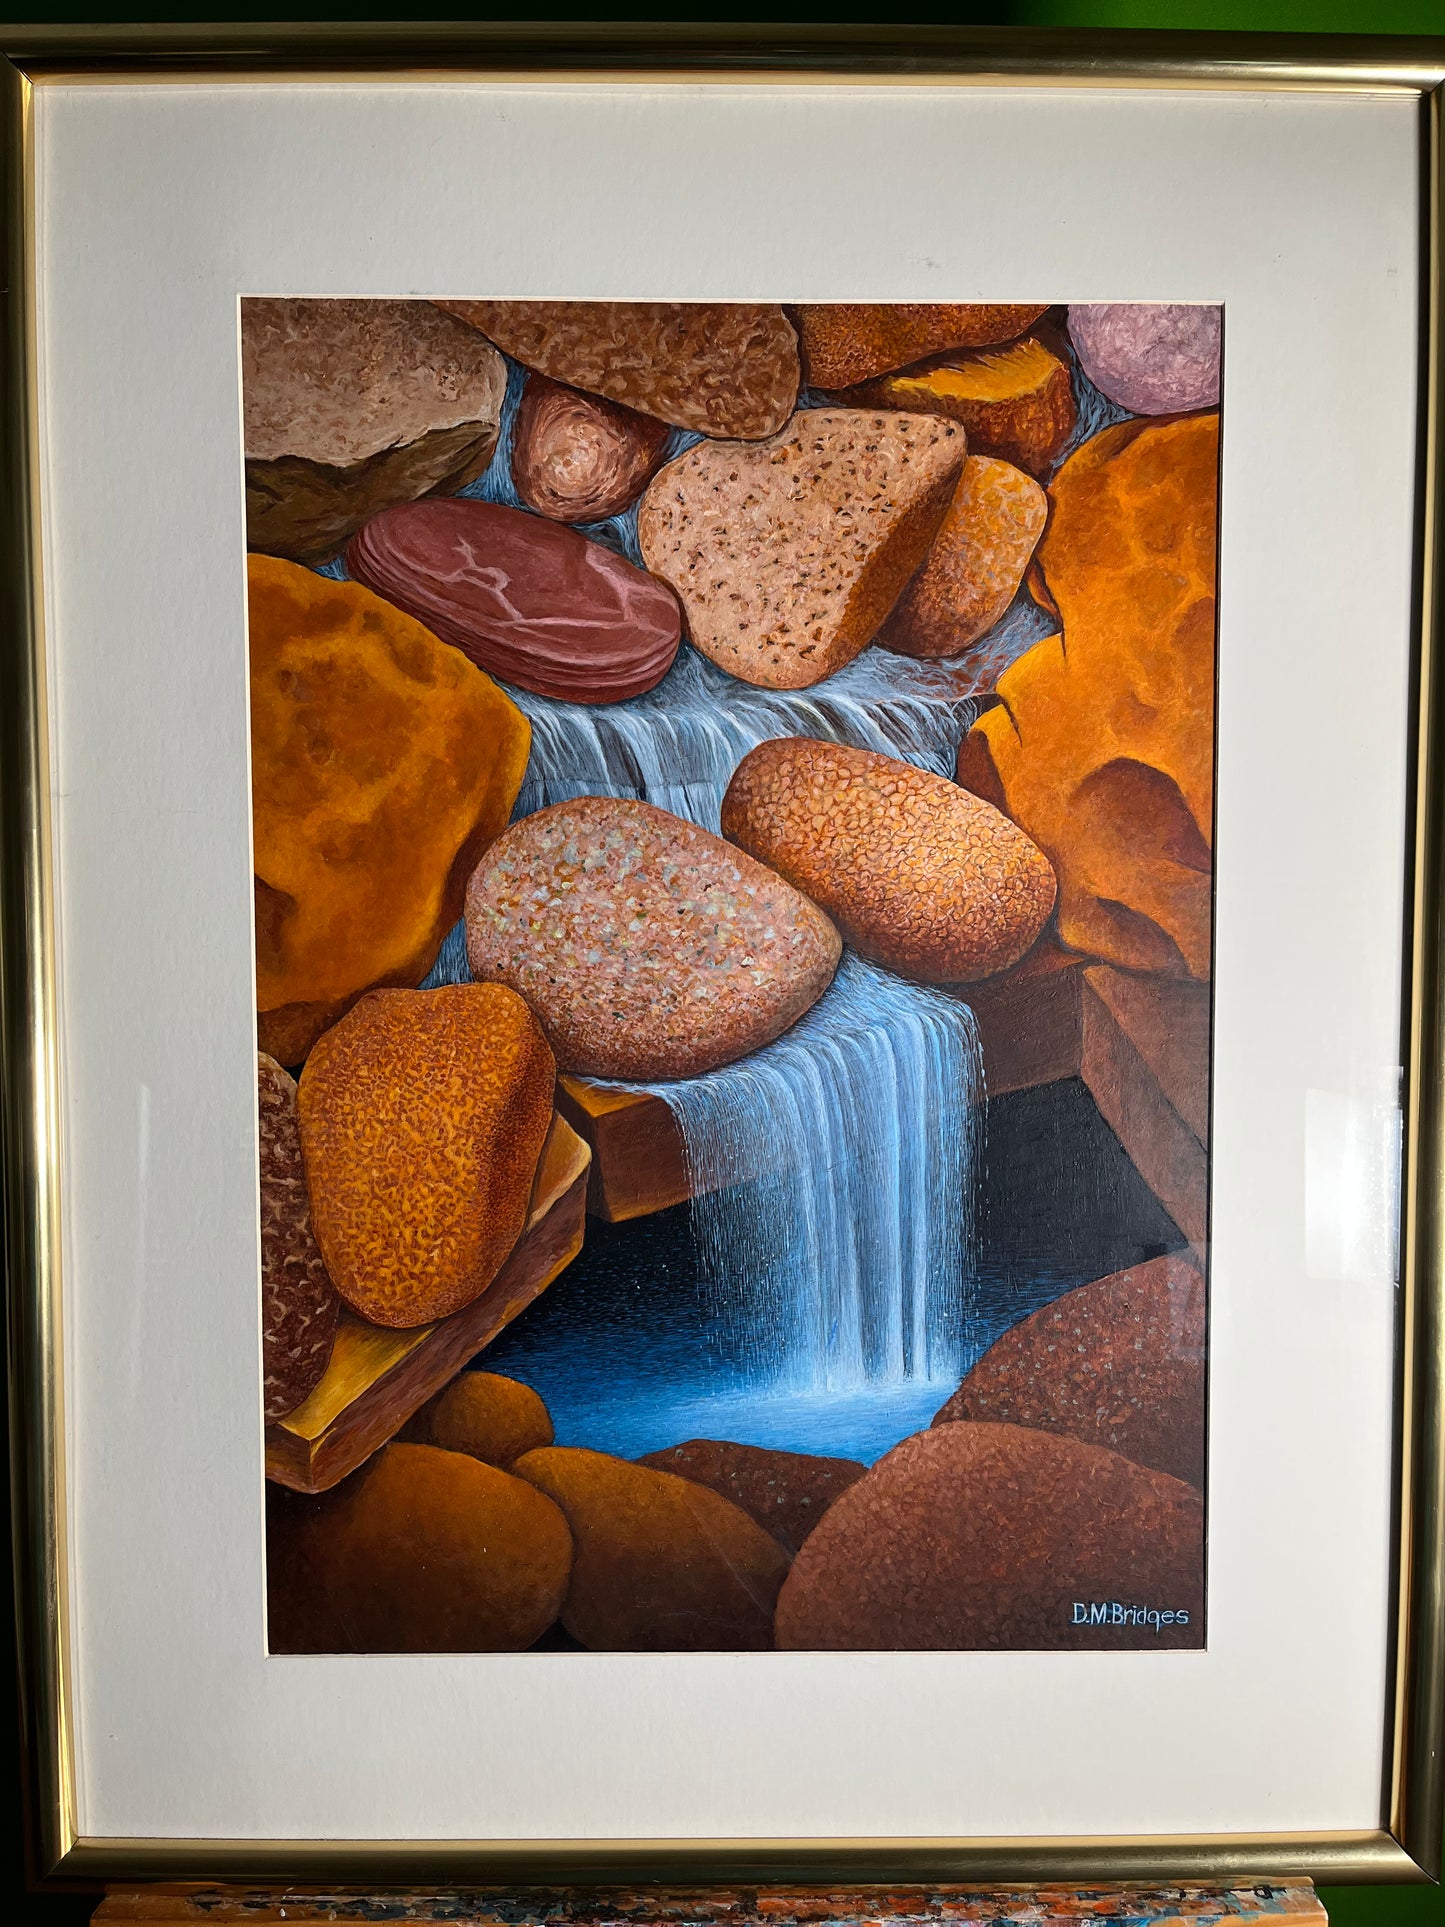 Limited Edition “Serenity” Acrylic Painting by David M. Bridges